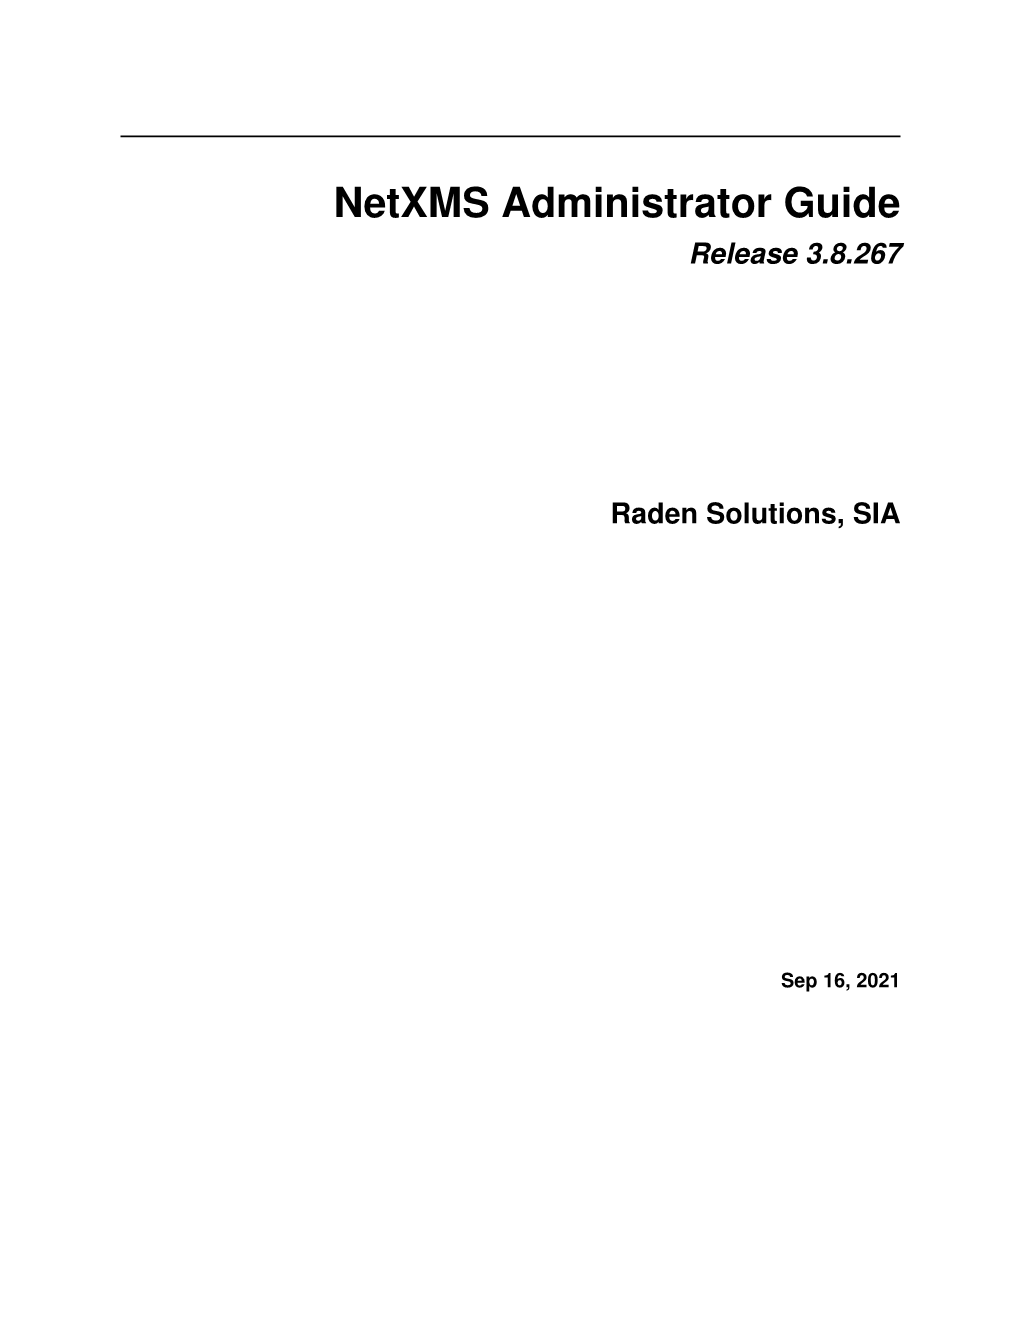 Netxms Administrator Guide Release 3.8.267